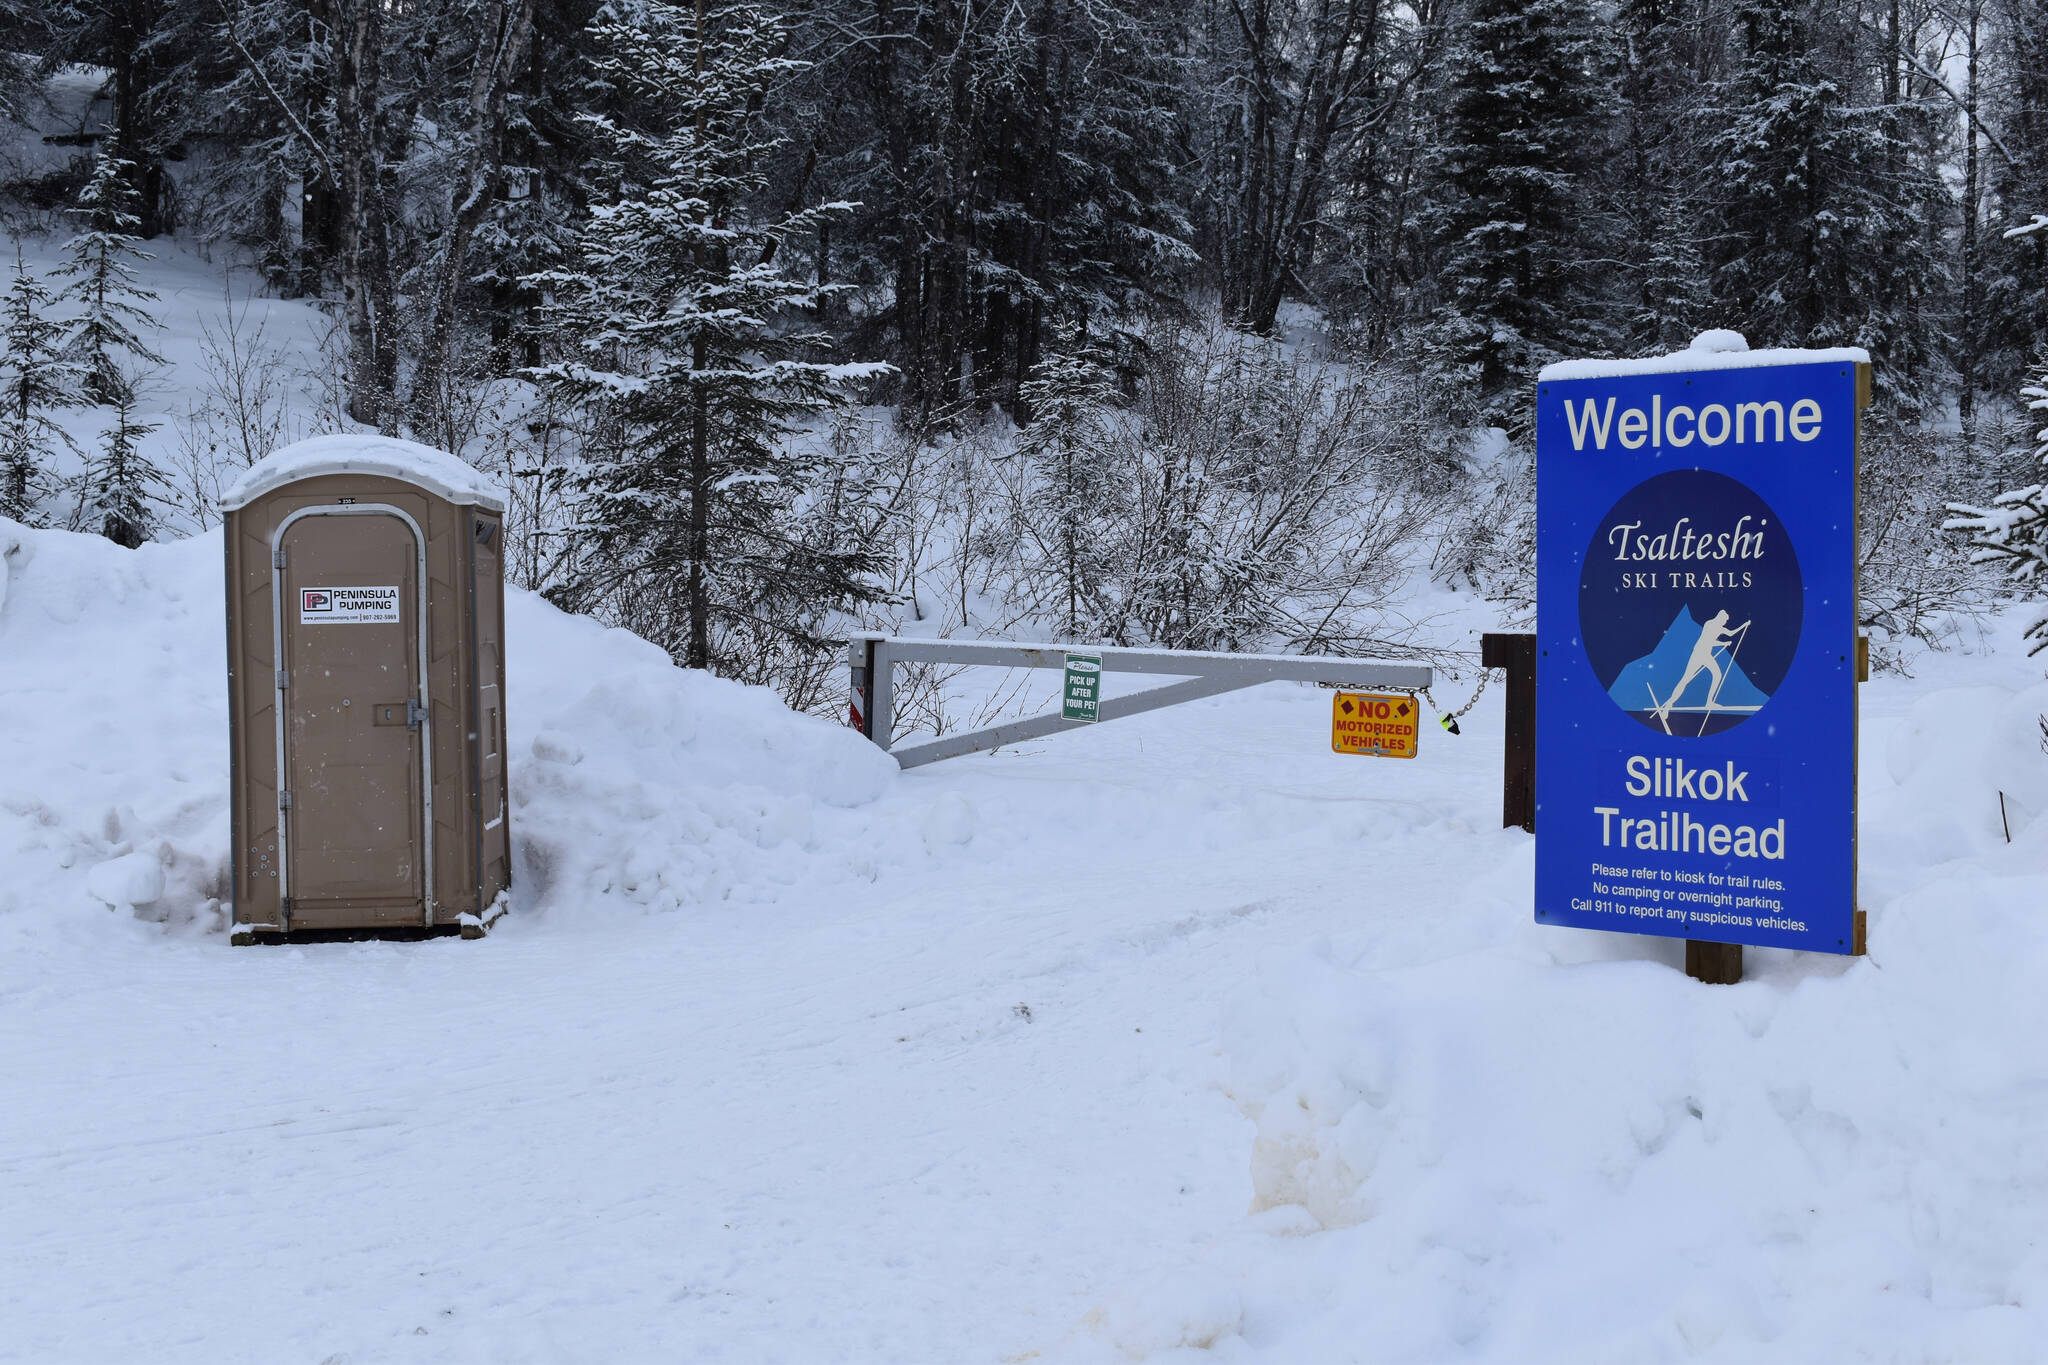 A recently added port-a-potty is available in the parking lot of Slikok Multi-Use Trails on Thursday, Feb. 2, 2023, in Soldotna, Alaska. (Jake Dye/Peninsula Clarion)